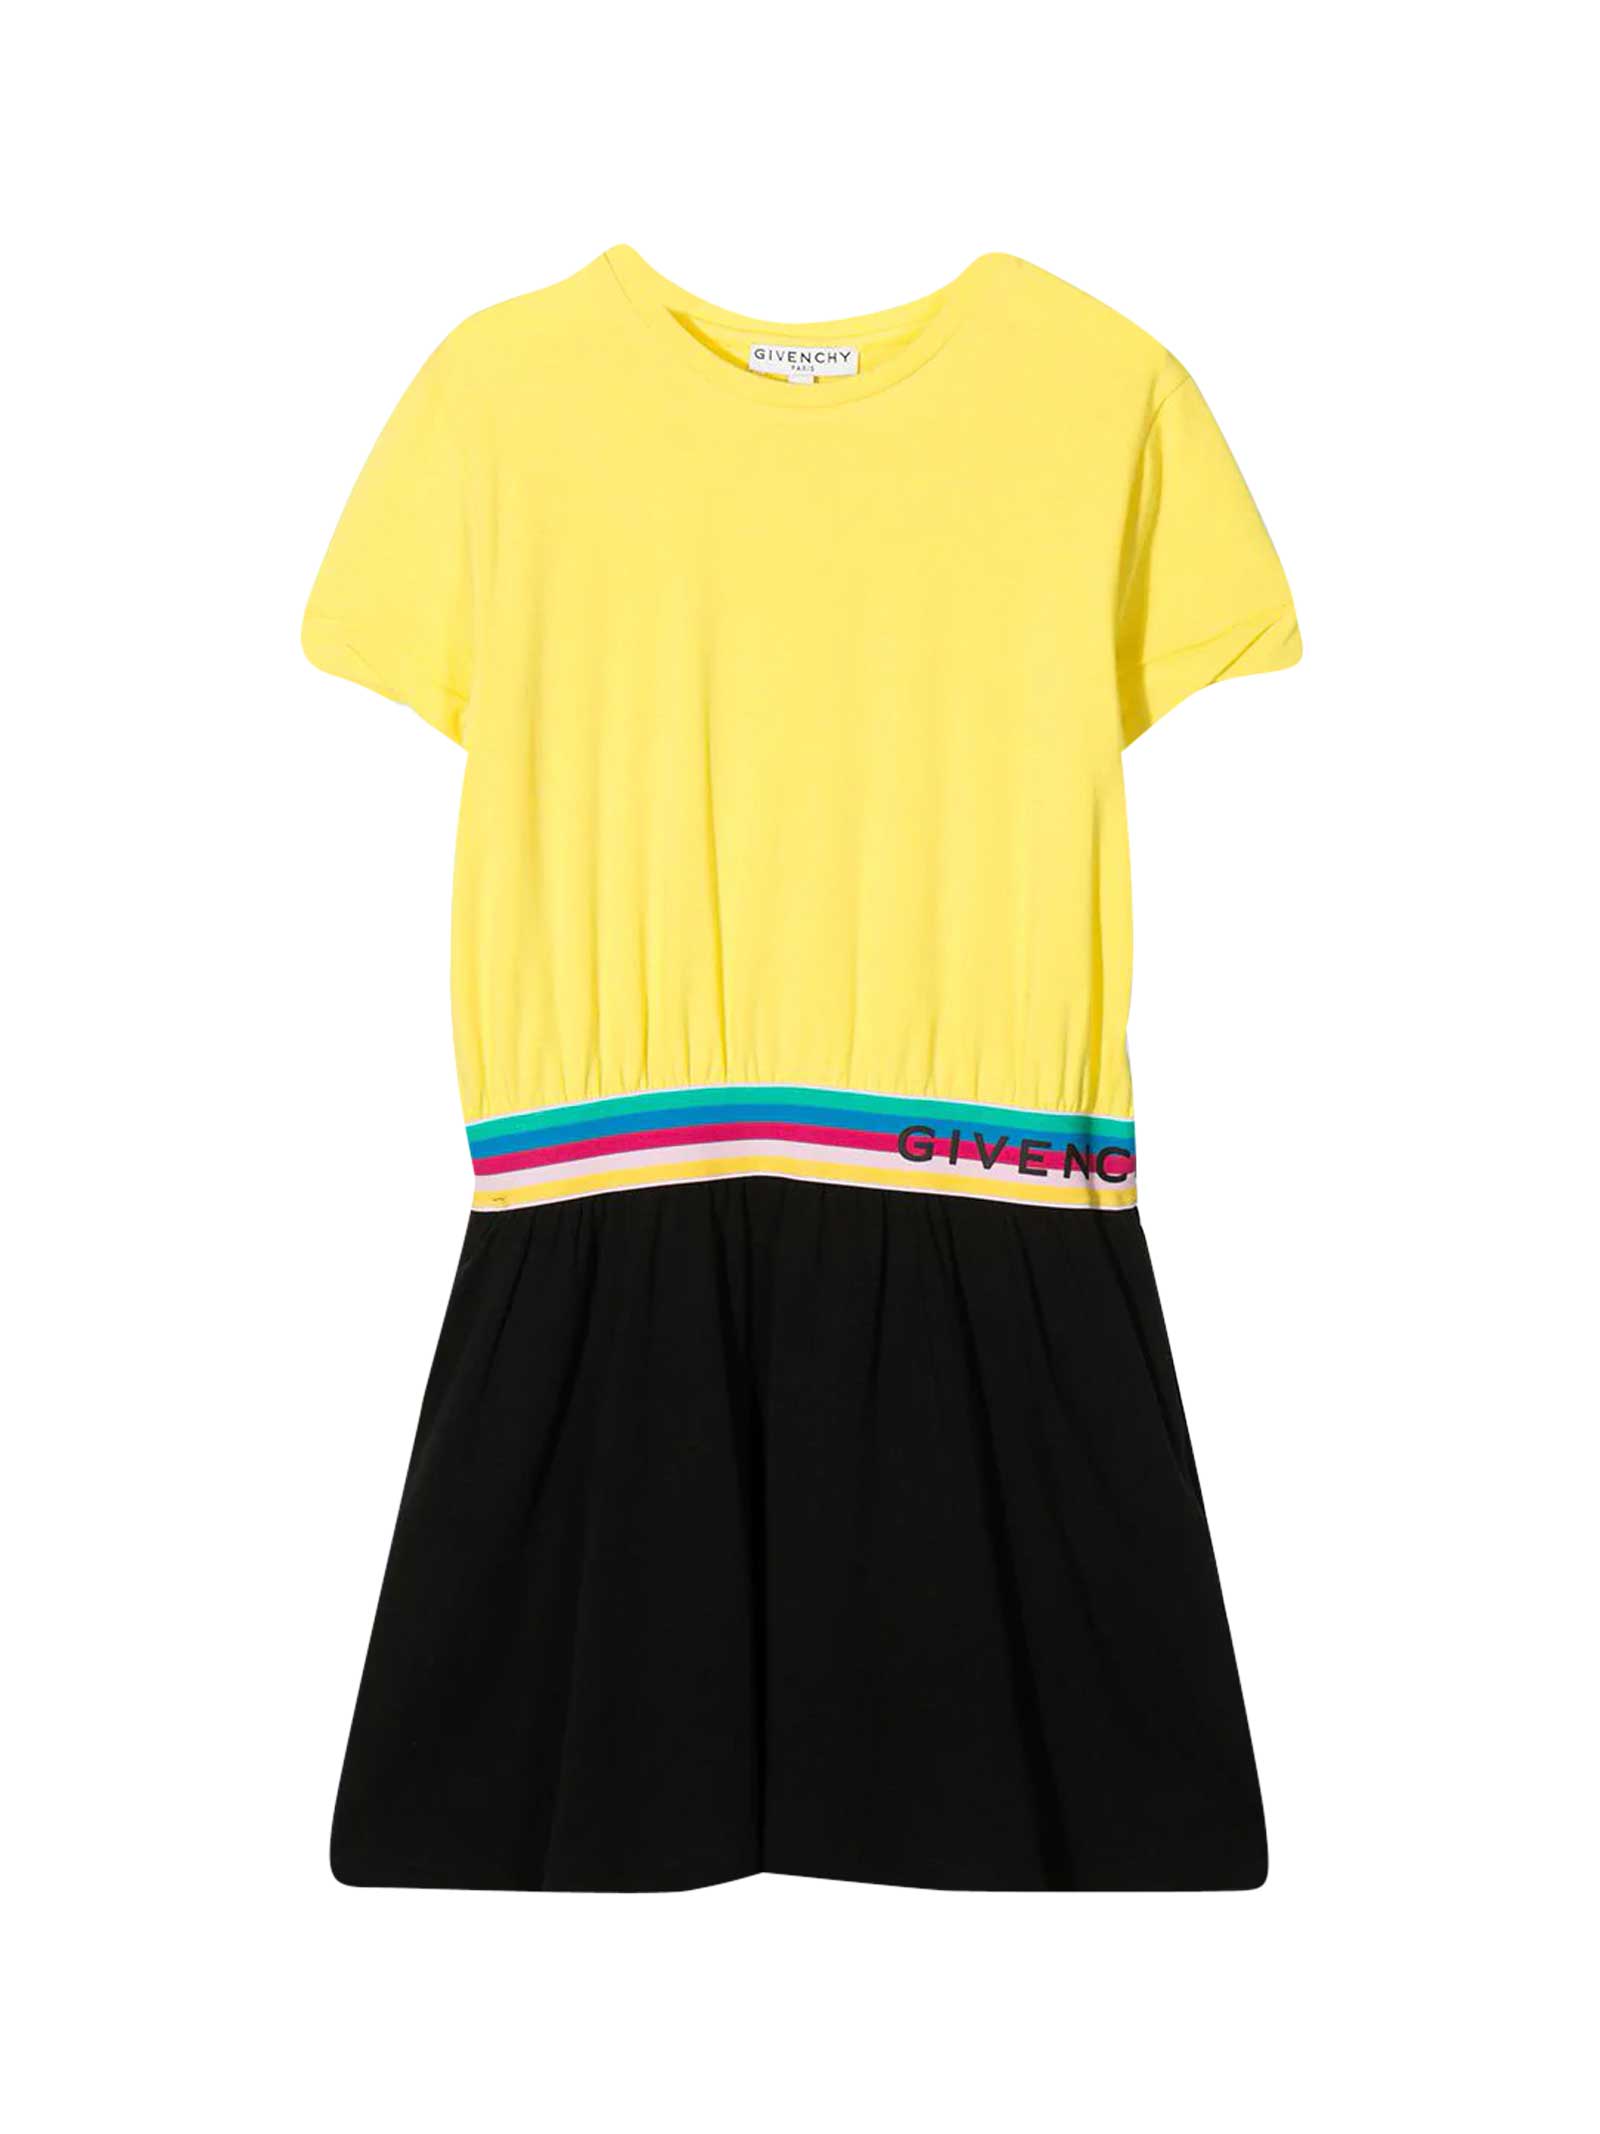 Givenchy Two-tone T-shirt Dress